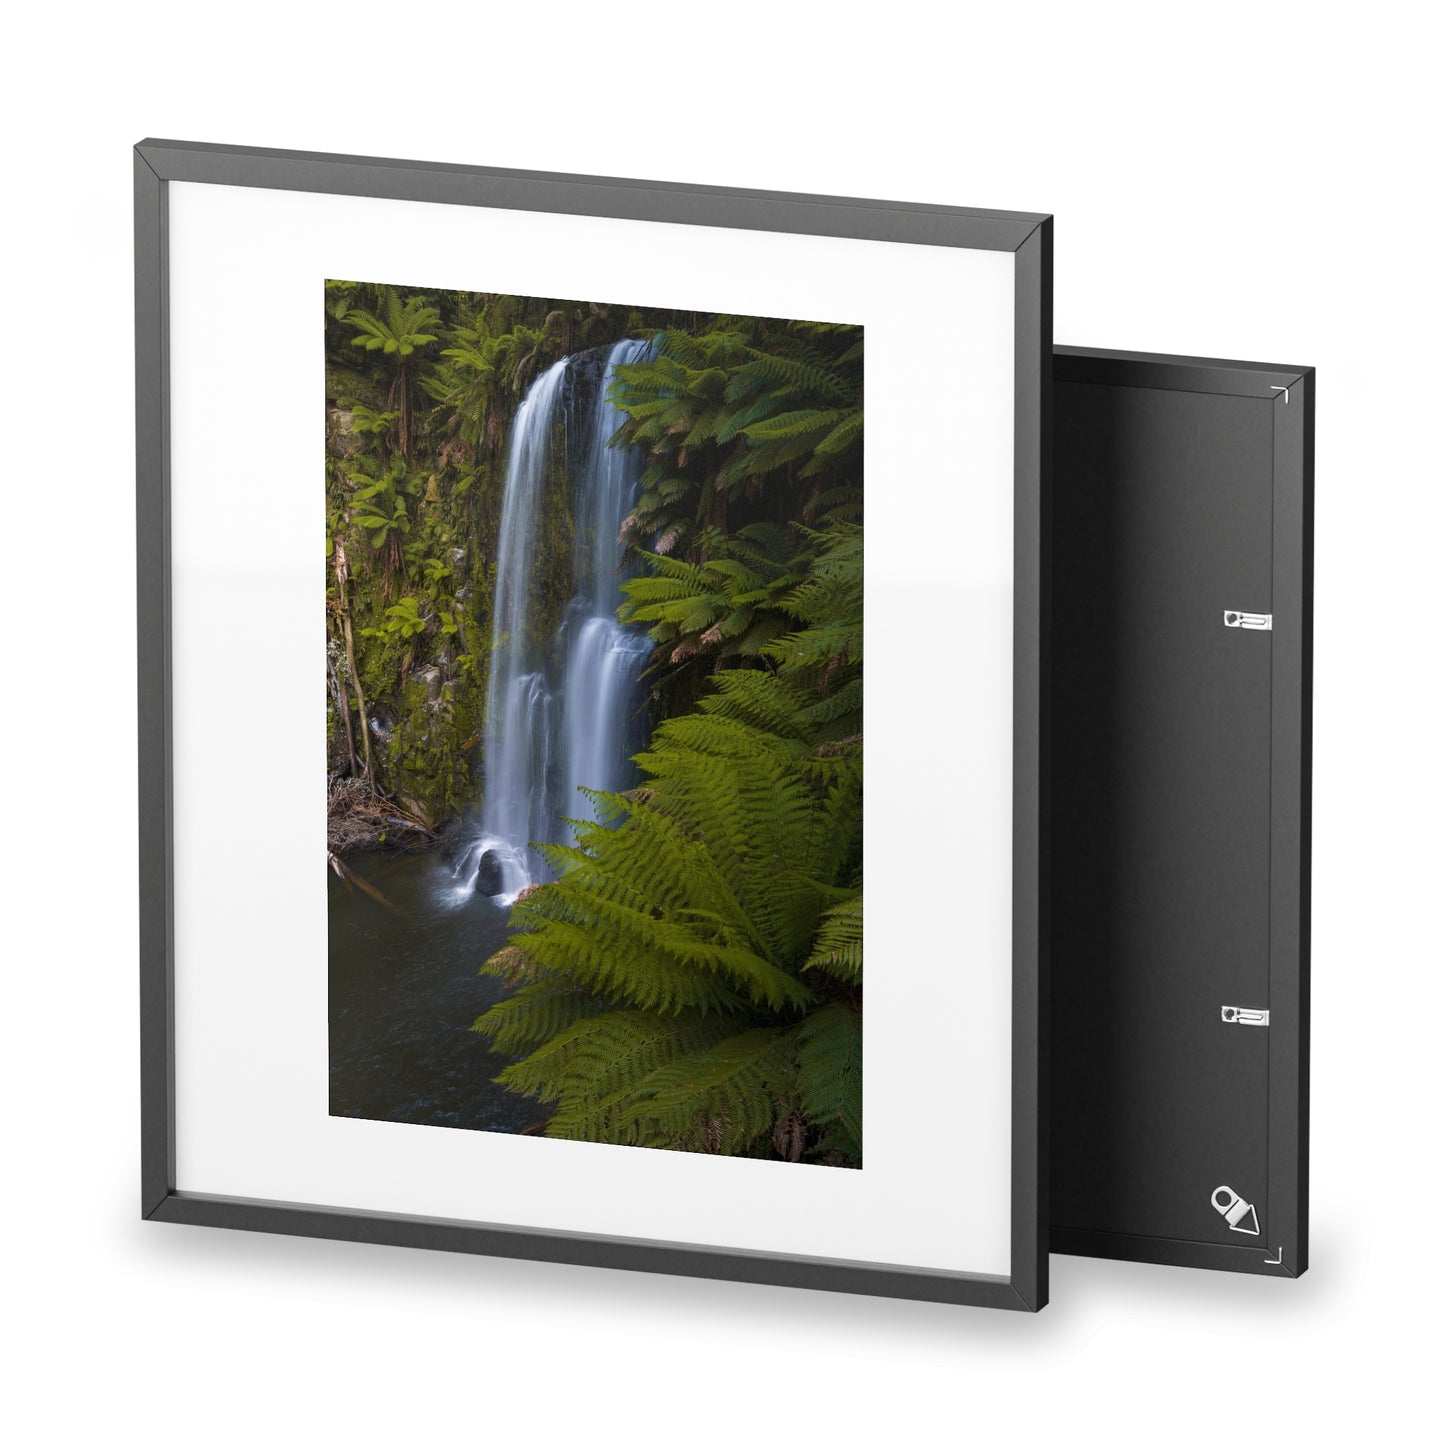 The beautiful Beauchamp Falls printed on a framed matte poster